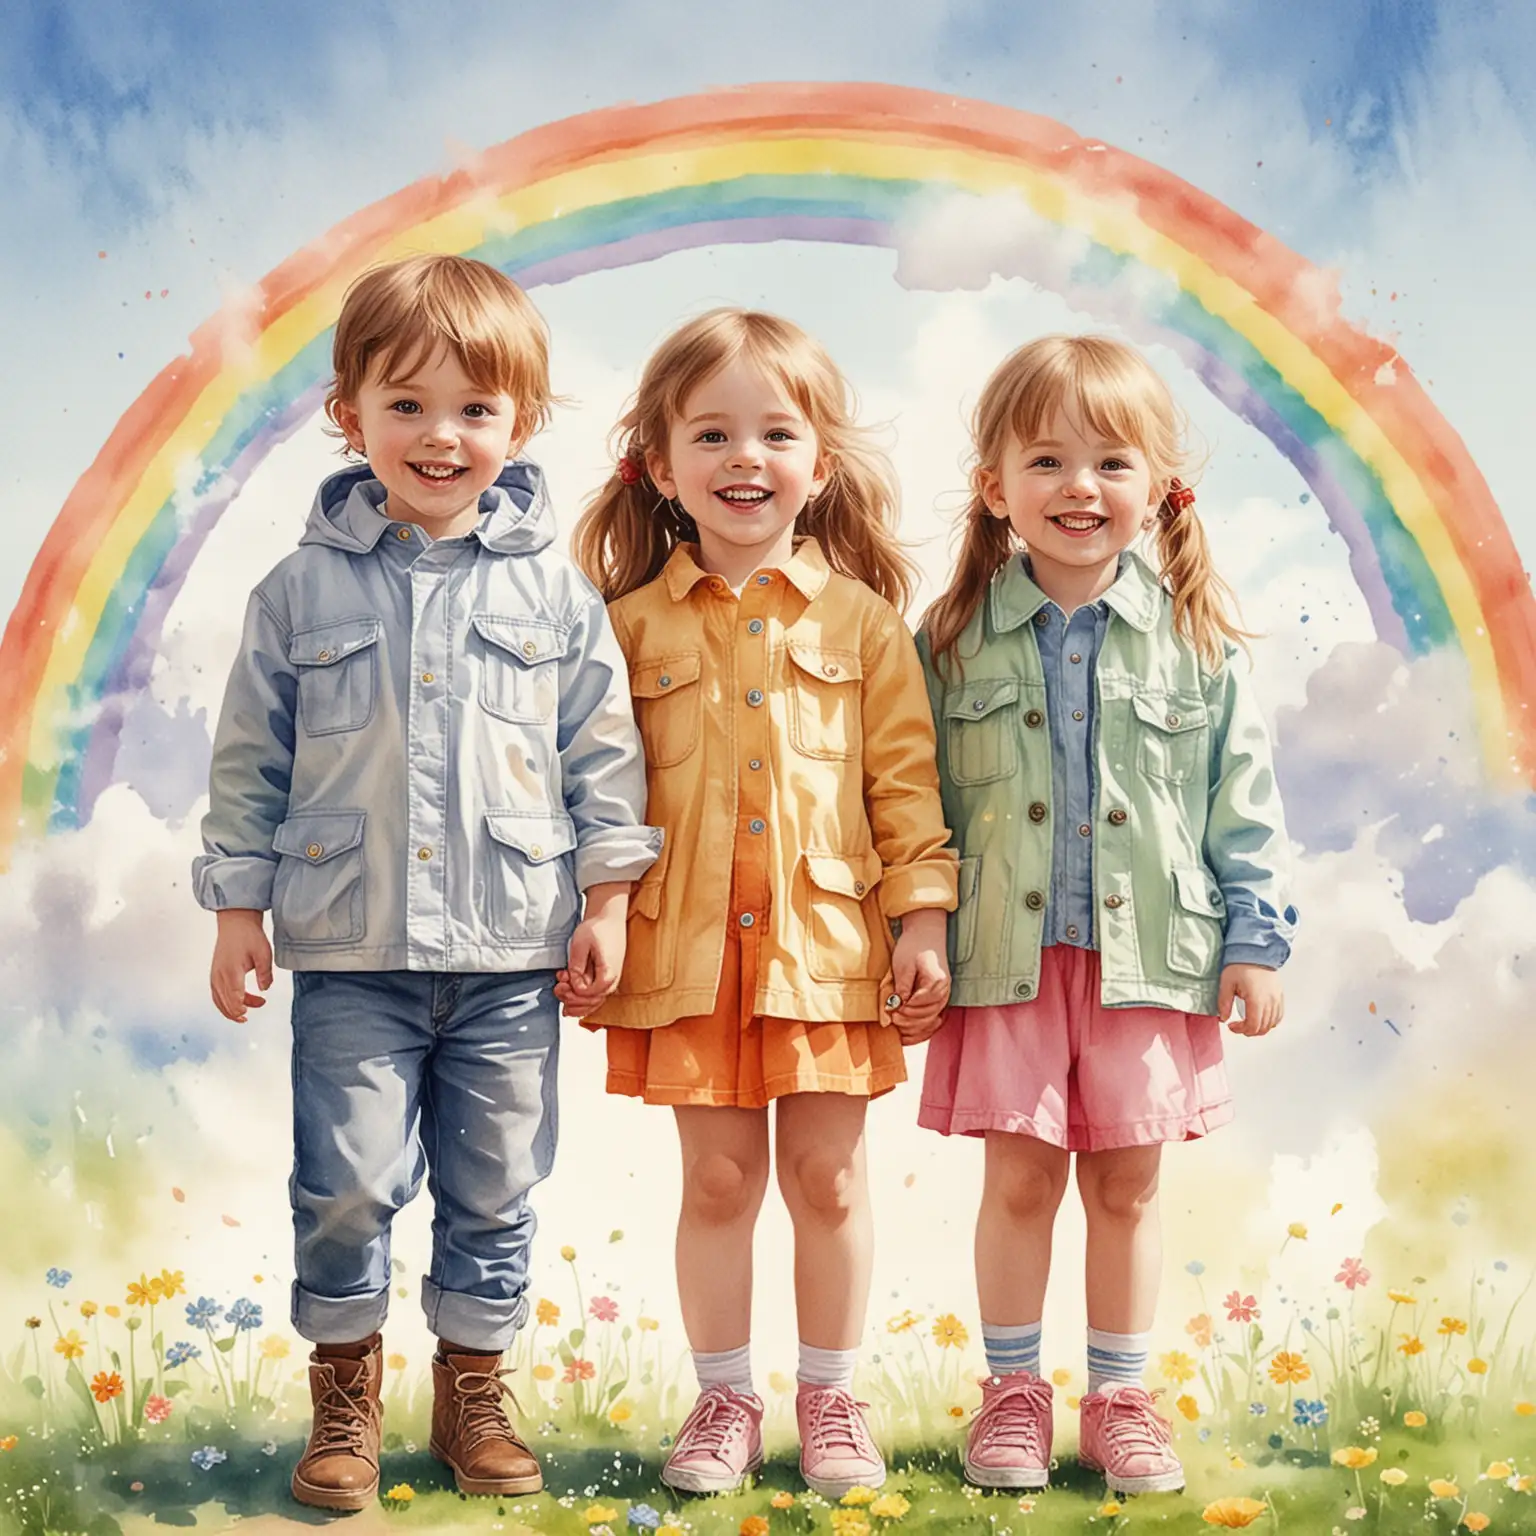 Children Enjoying Spring Weather with Rainbow and Sun Watercolor Illustration